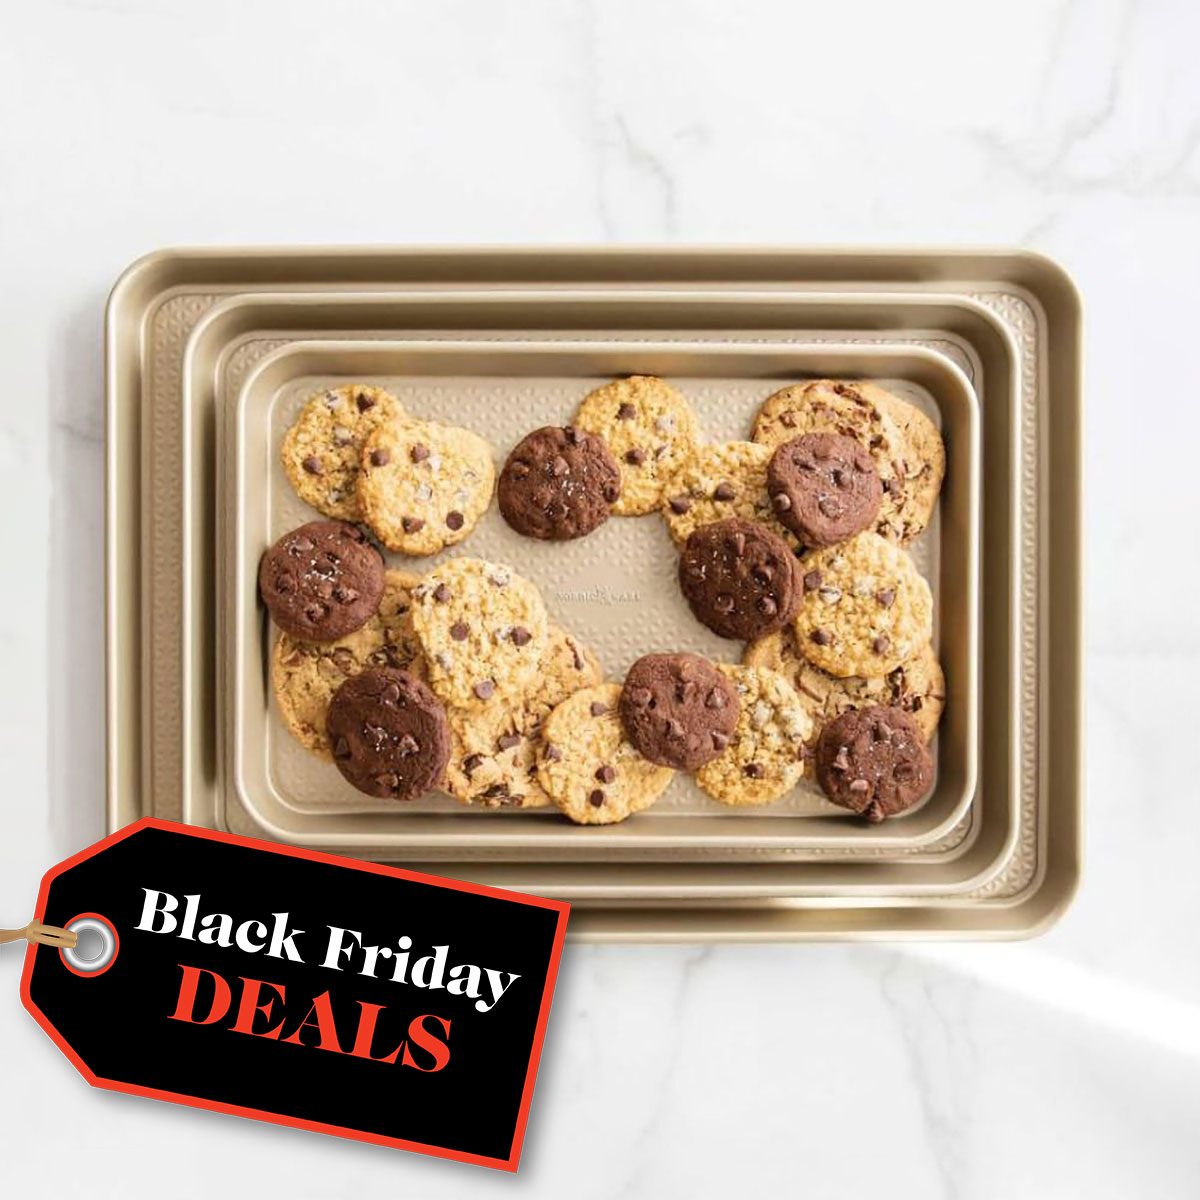 Black Friday kitchen deals: Recommended by our kitchen editor - Reviewed